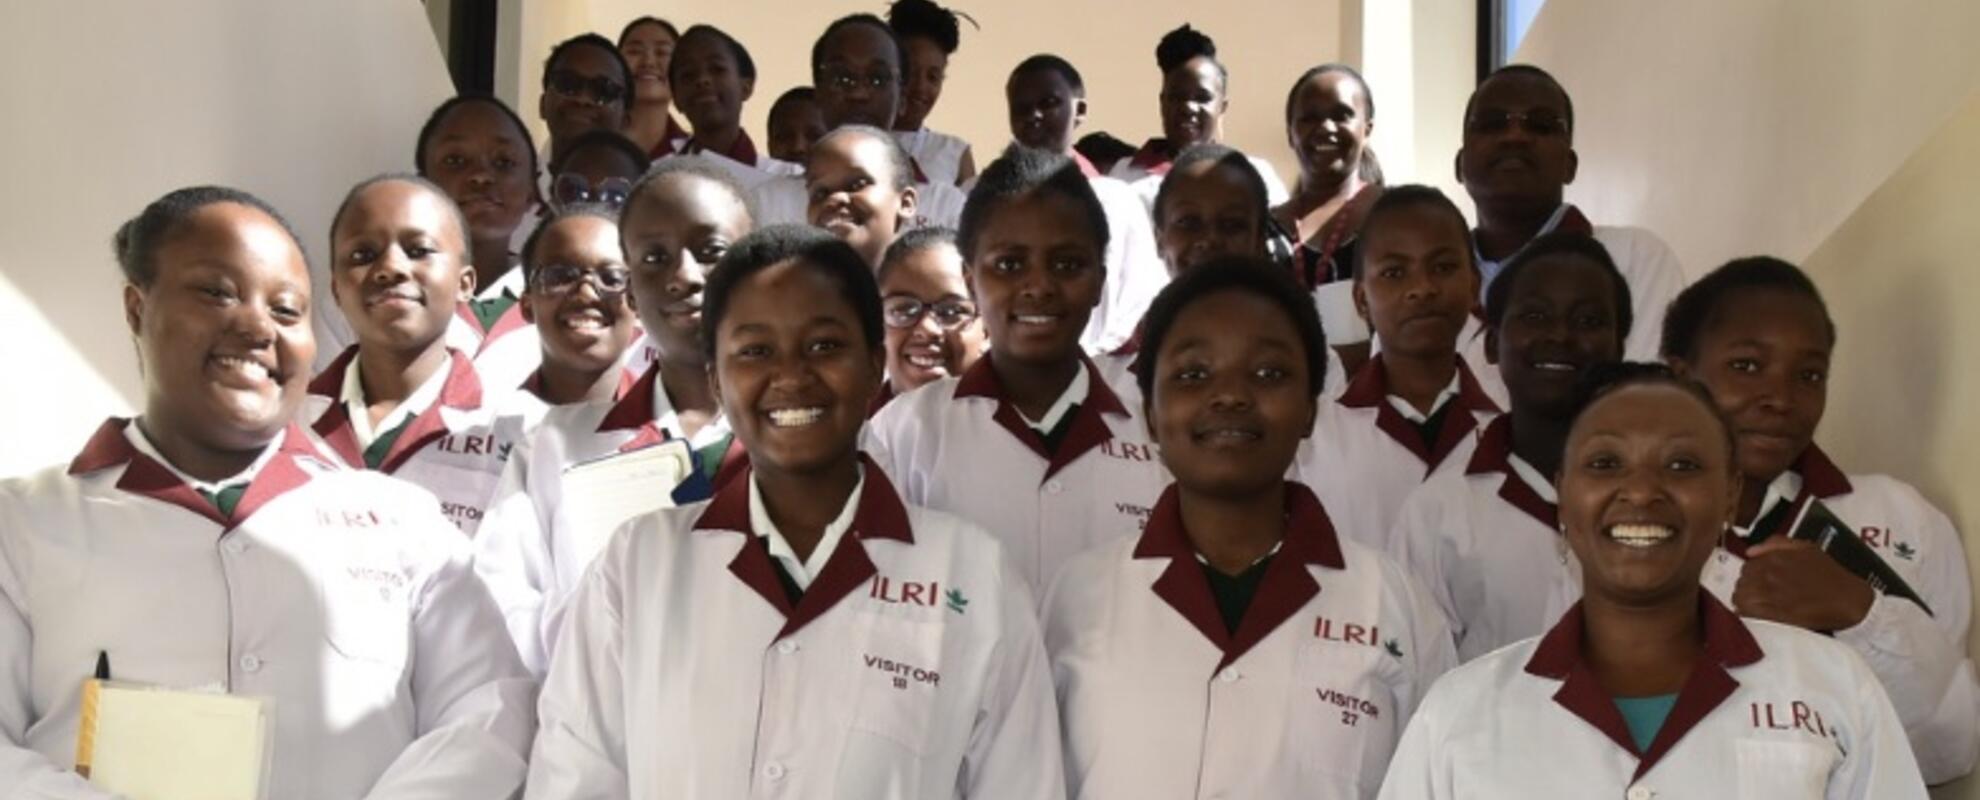 The Capacity Development Unit celebrates International Day of Women and Girls in Science with visit from secondary school